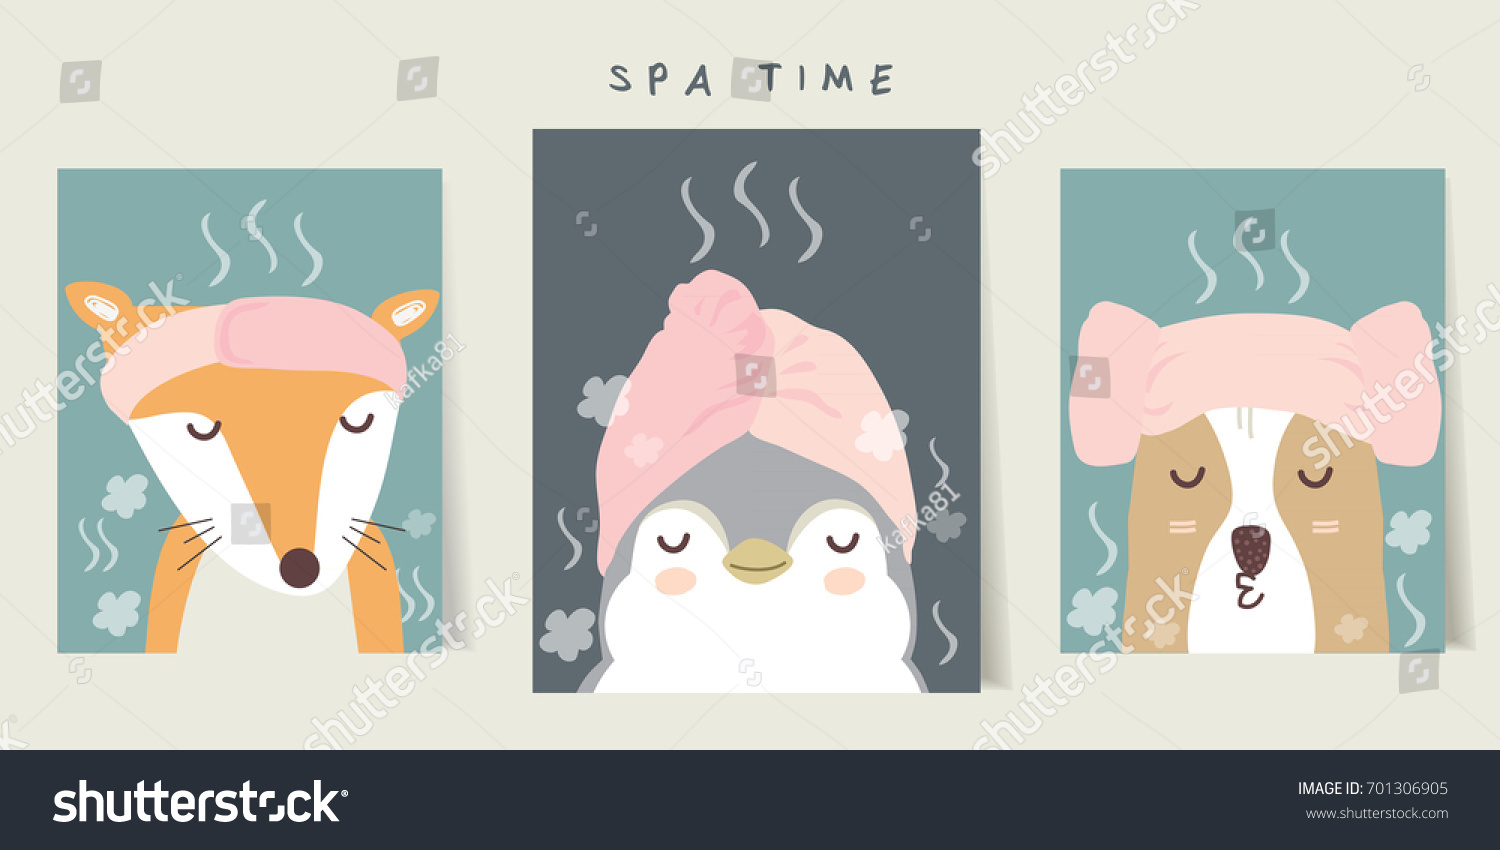 SVG of Set of cute cartoon Spa Time characters. Vector illustration. svg